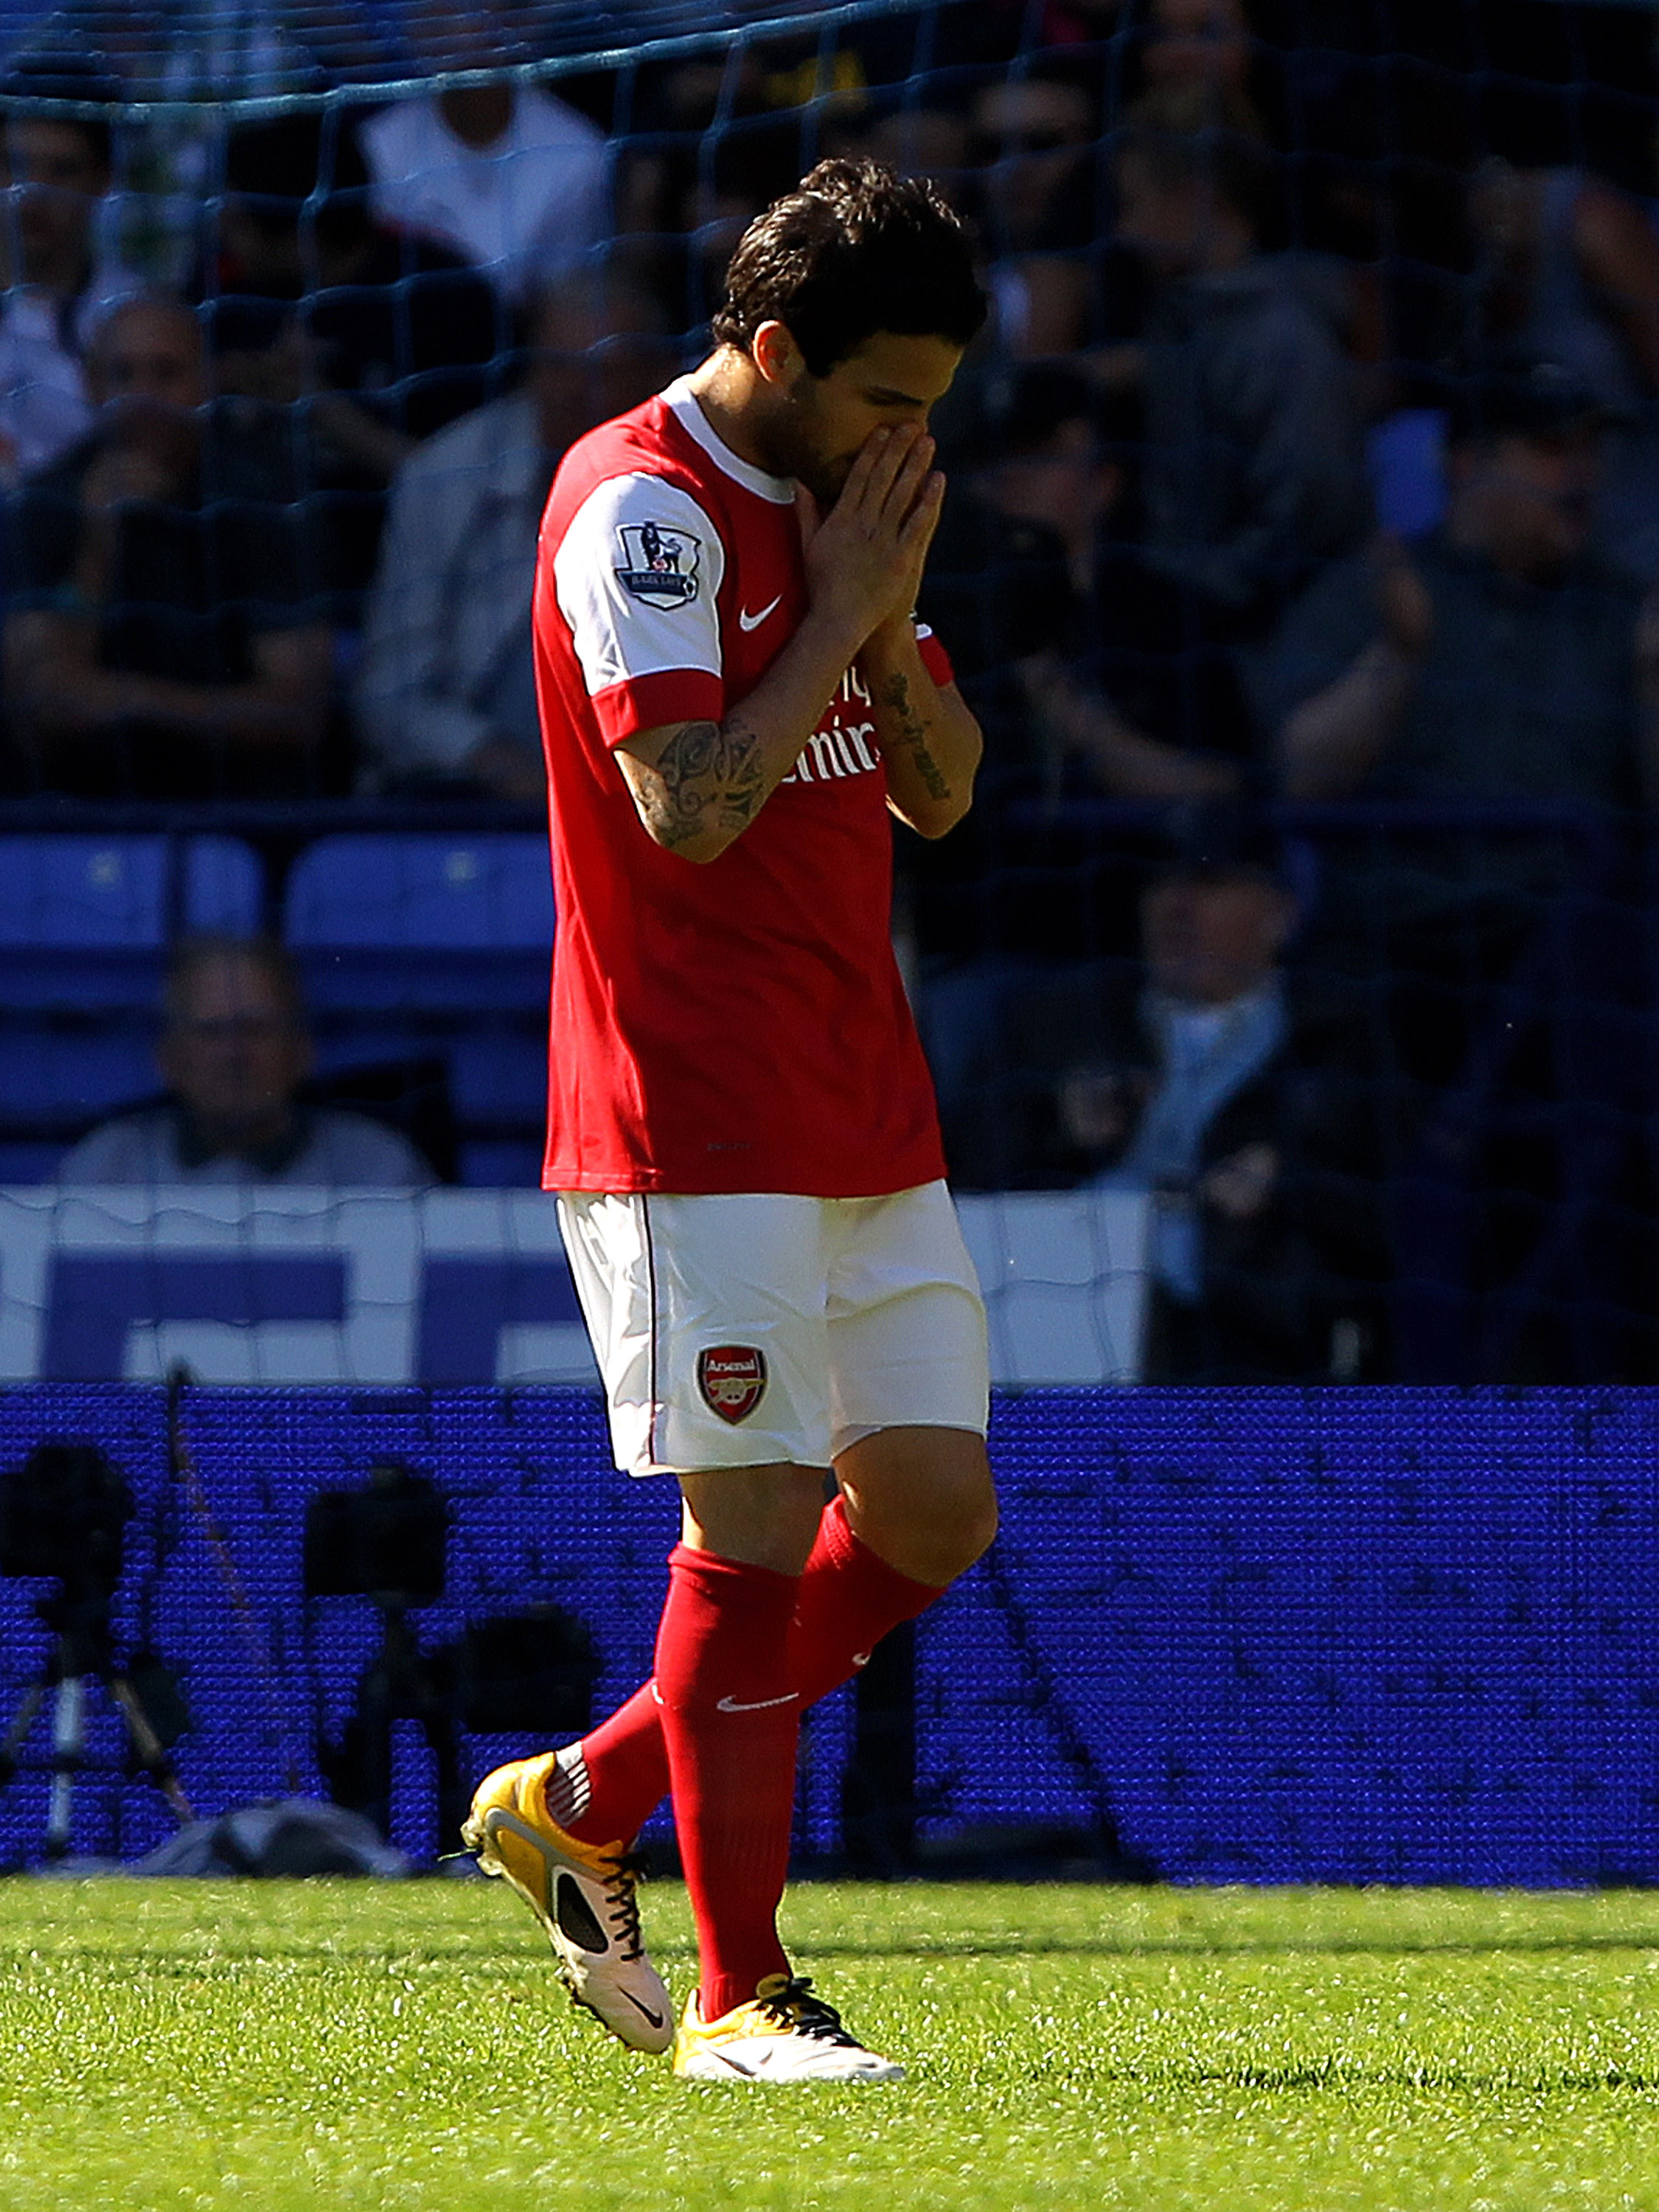 BOLTON, ENGLAND - APRIL 24:  Cesc Fabregas of Arsenal reacts during the Barclays Premier League match between Bolton Wanderers and Arsenal at the Reebok Stadium on April 24, 2011 in Bolton, England.  (Photo by Clive Brunskill/Getty Images)